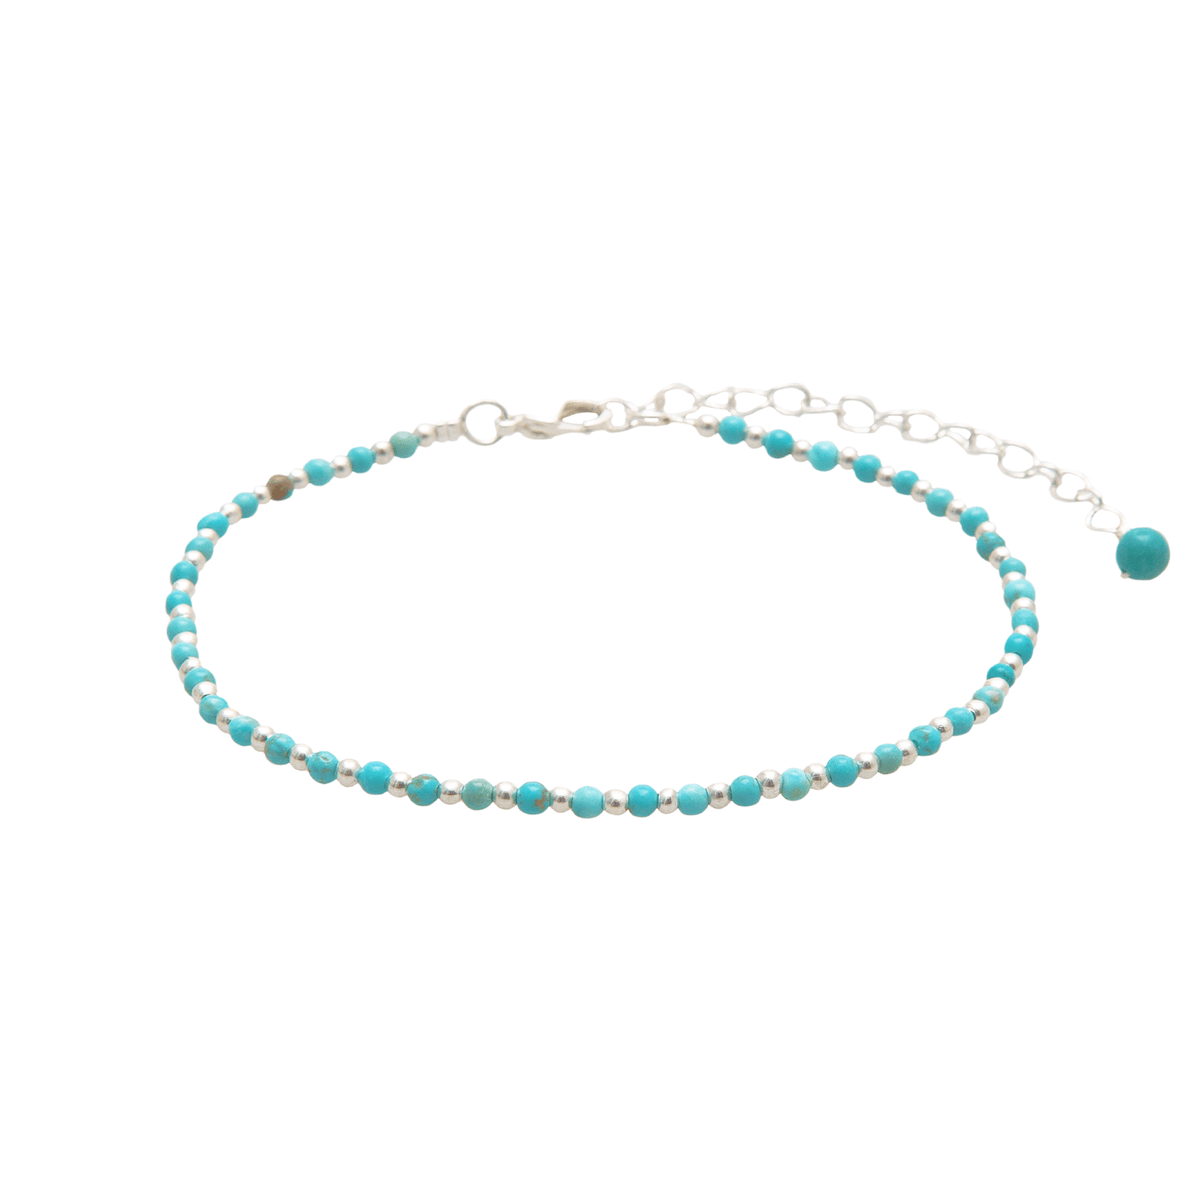 2mm turquoise stone and silver bead healing anklet with silver chain